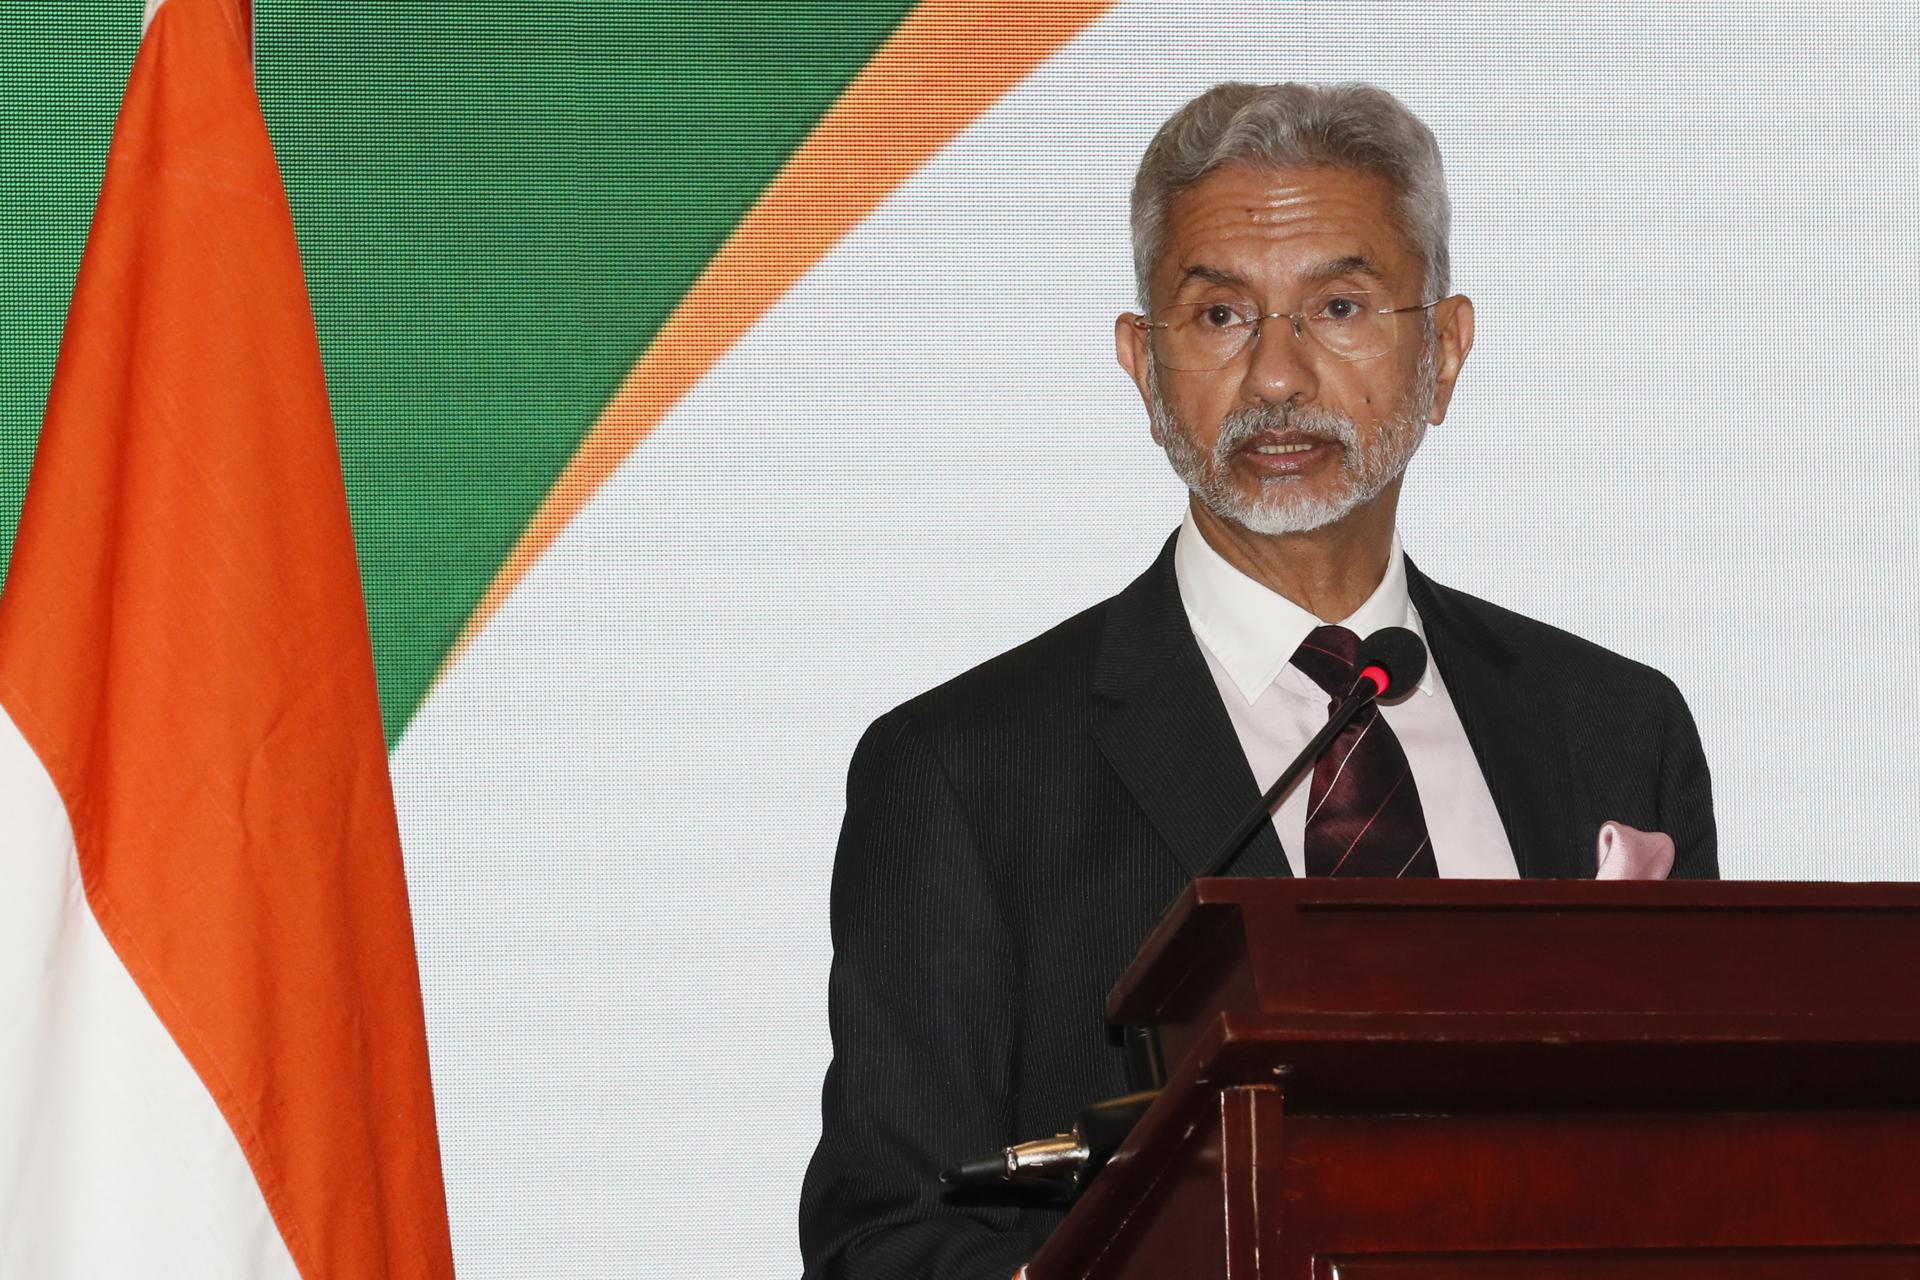 India's foreign minister, Dr. S. Jaishankar, speaks at the India-Colombia Business Forum in Bogota on 27 April 2023. EFE/Carlos Ortega